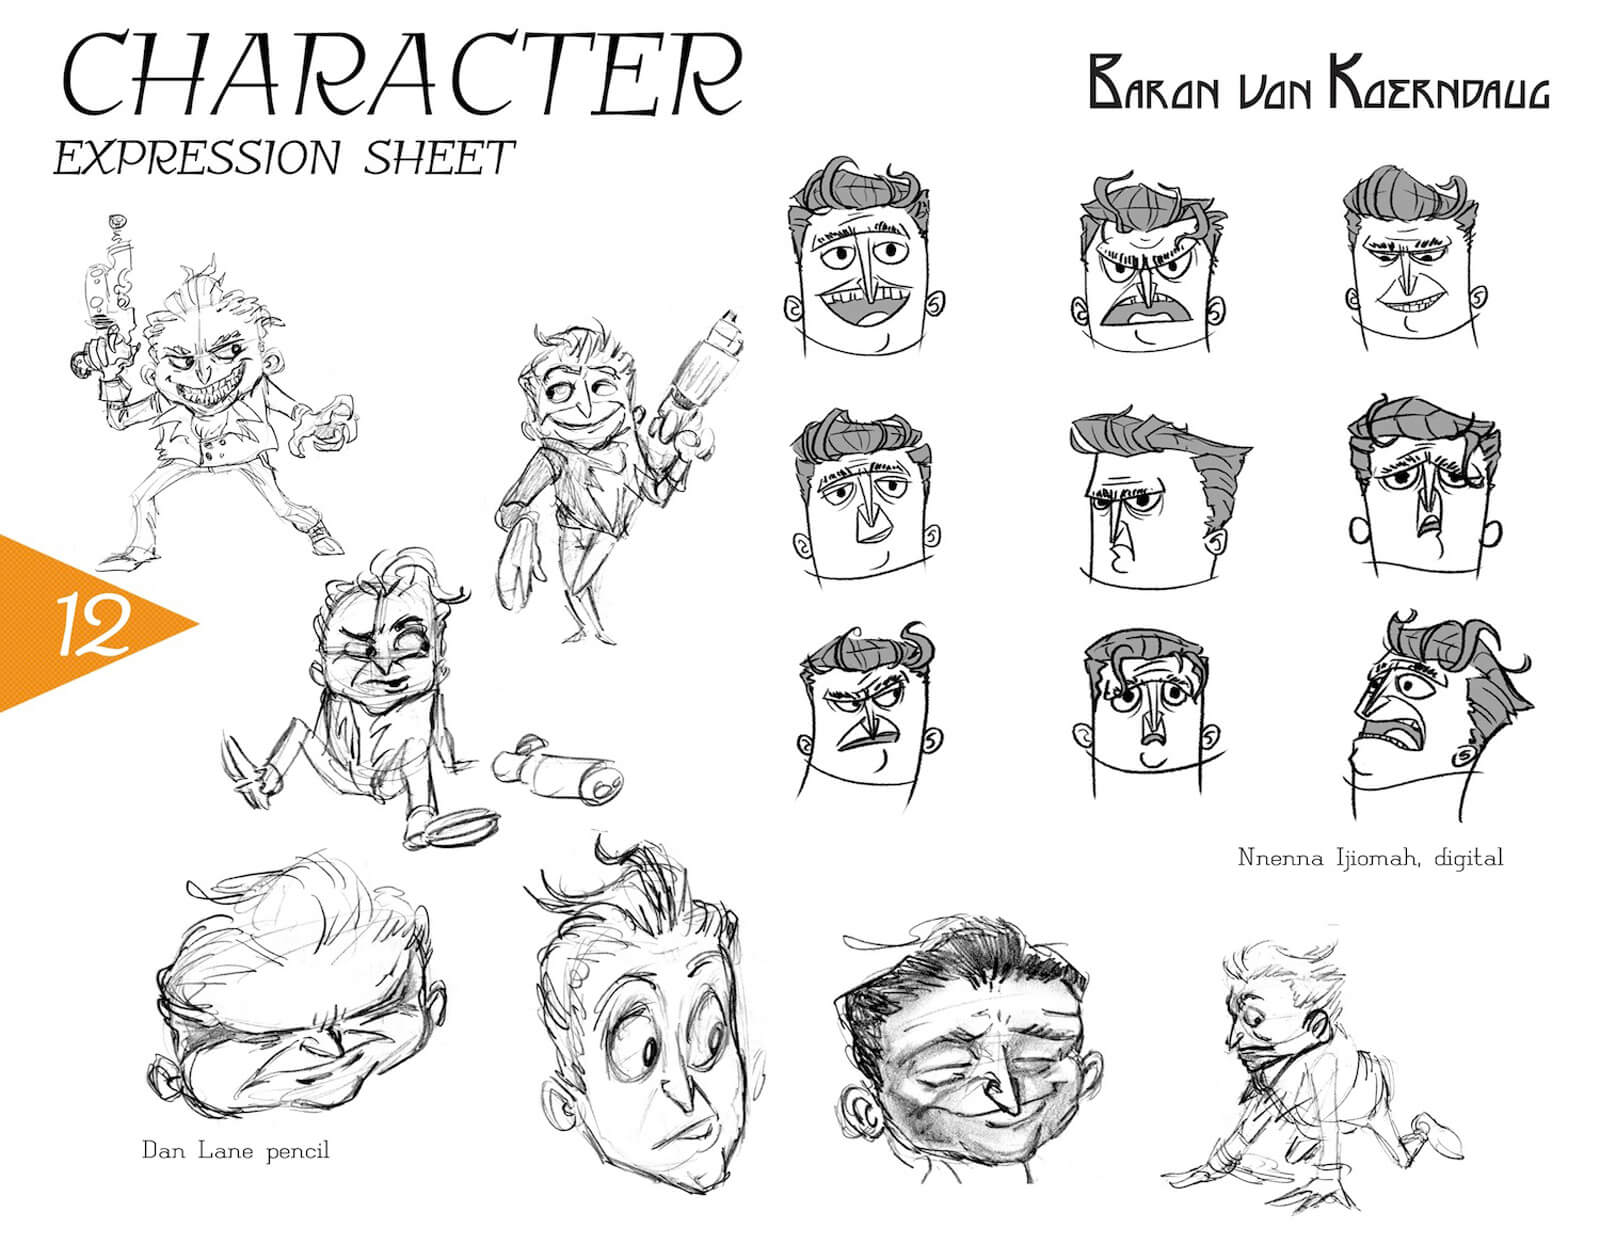 Expression sheet for Baron von Koerndaug, depicting black-and-white sketches of anger, suspicion, sadness, and others